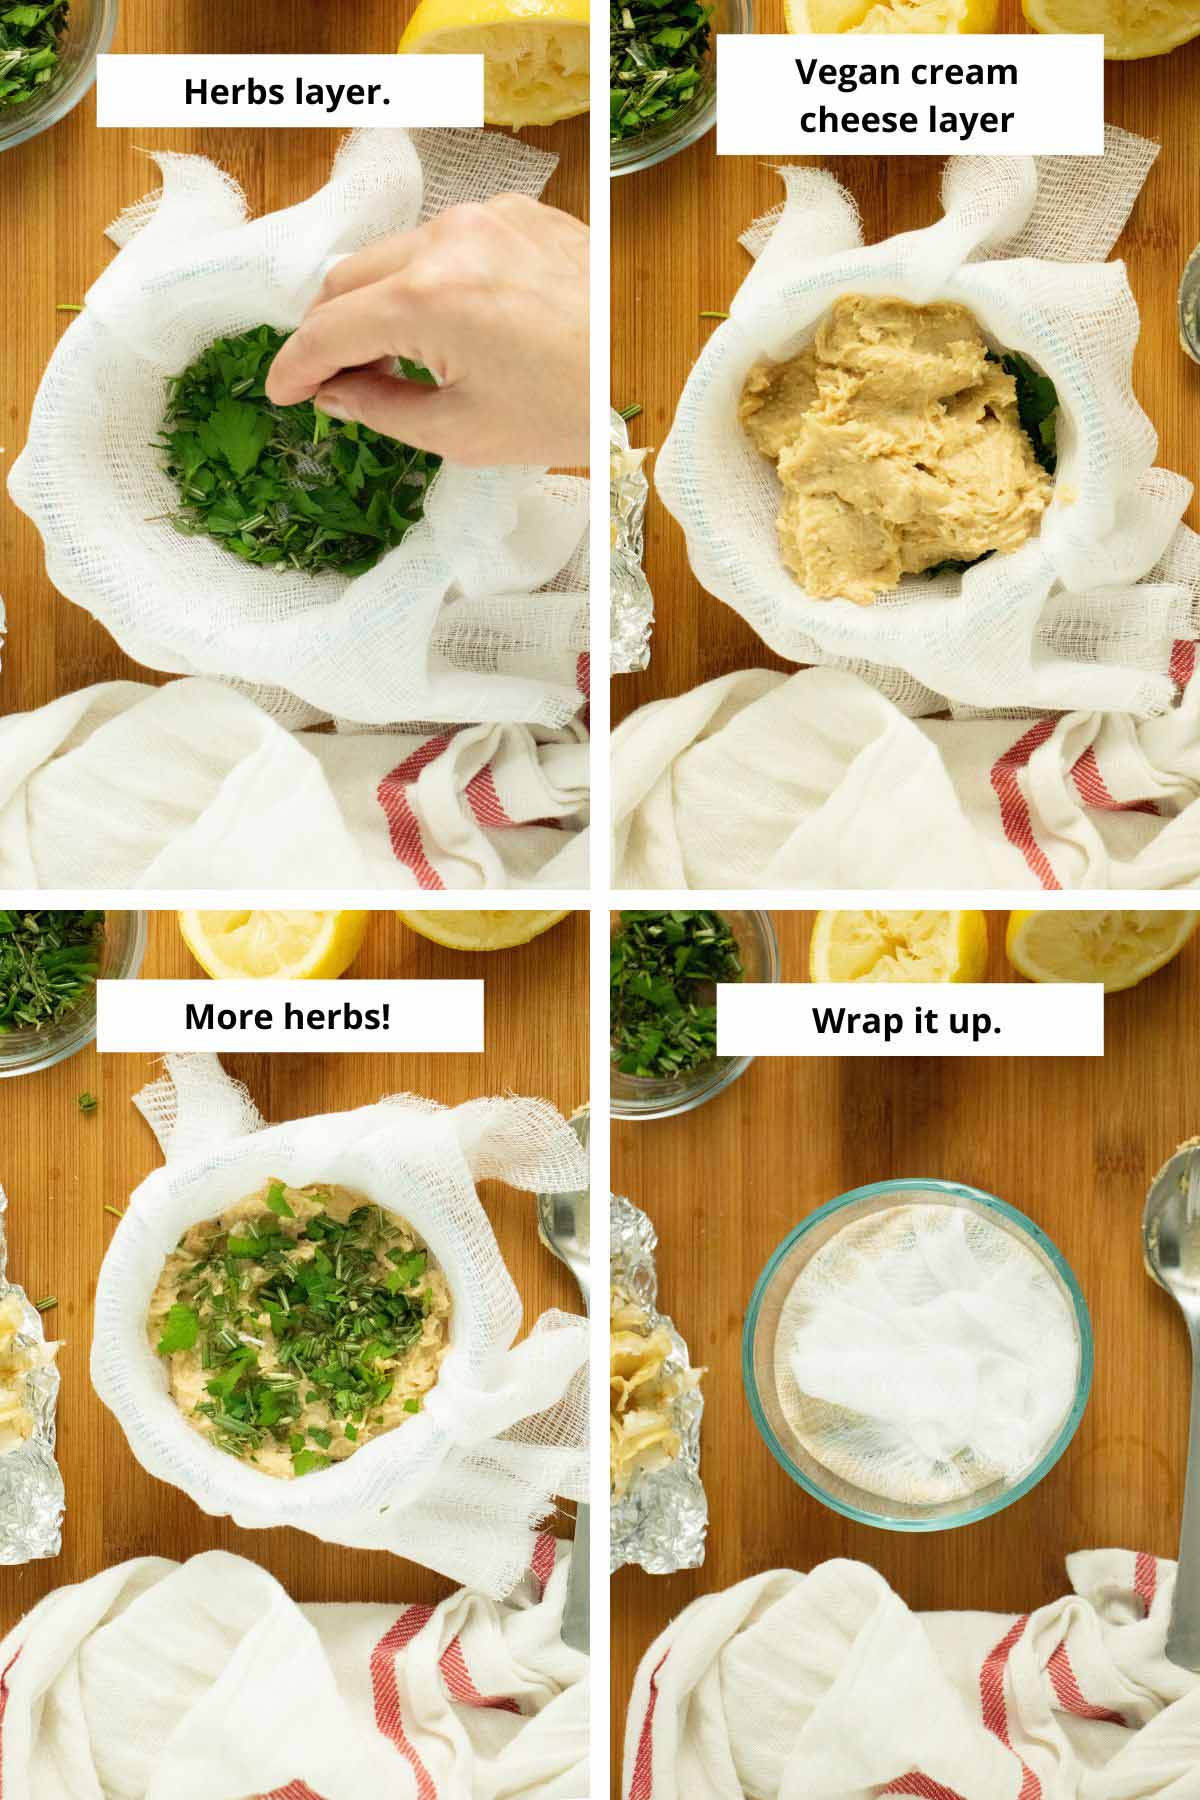 image collage showing layering the herbs and vegan cream cheese into the ramekin and wrapping it in cheesecloth